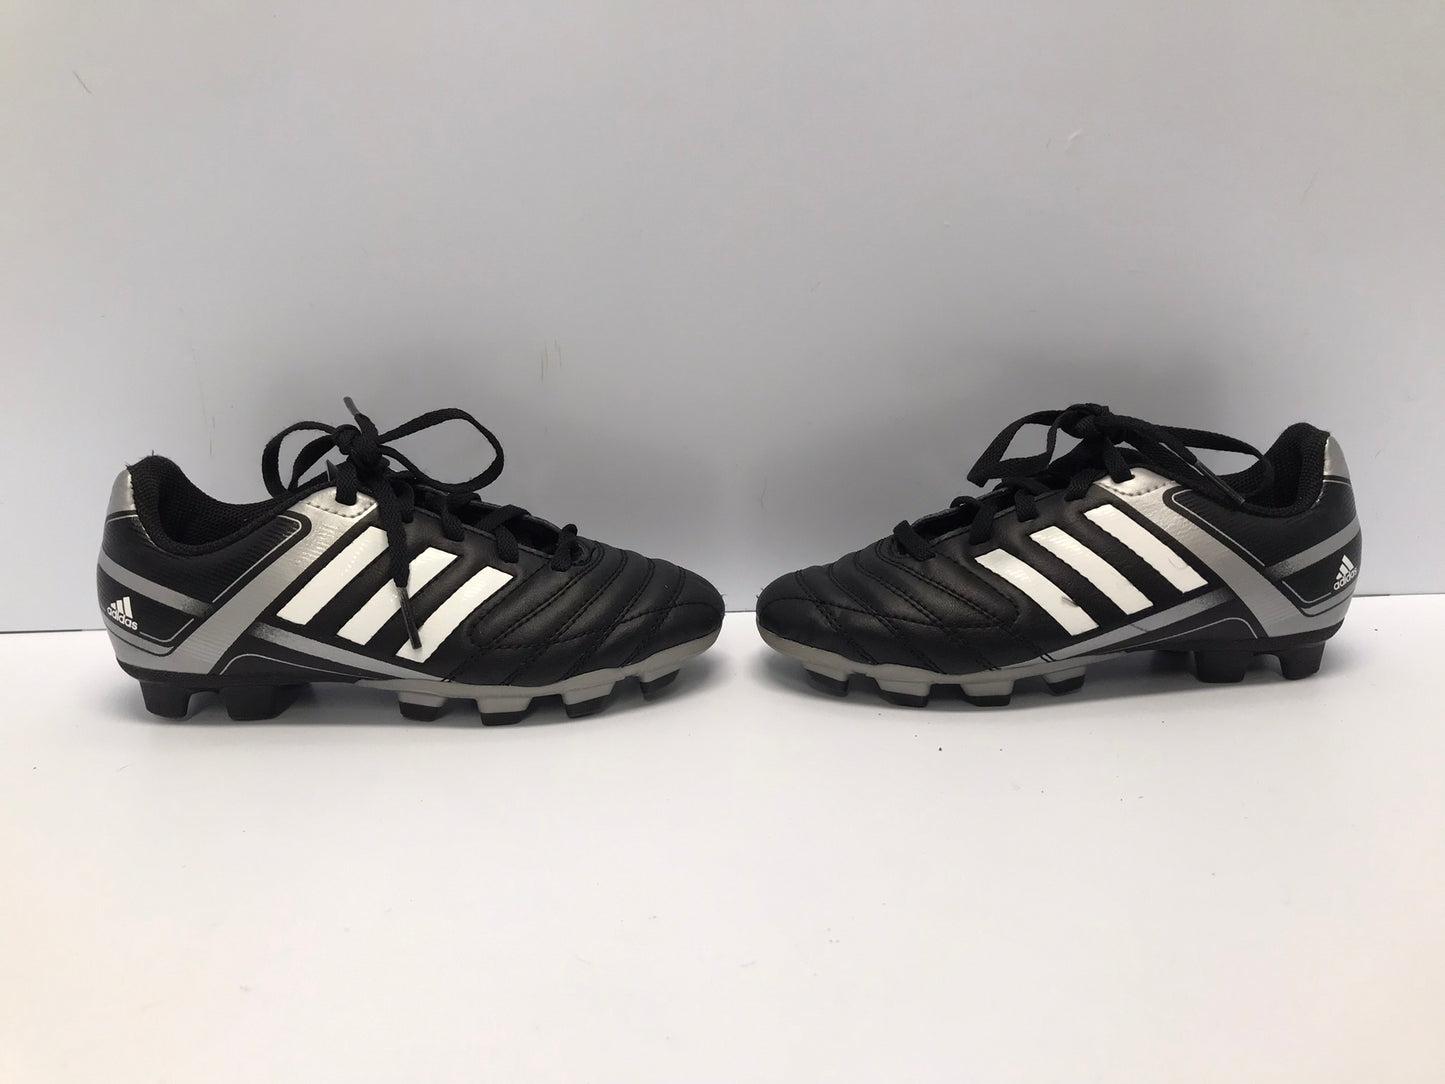 Soccer Shoes Cleats Child Size 13  Adidas Black Grey New Demo Model